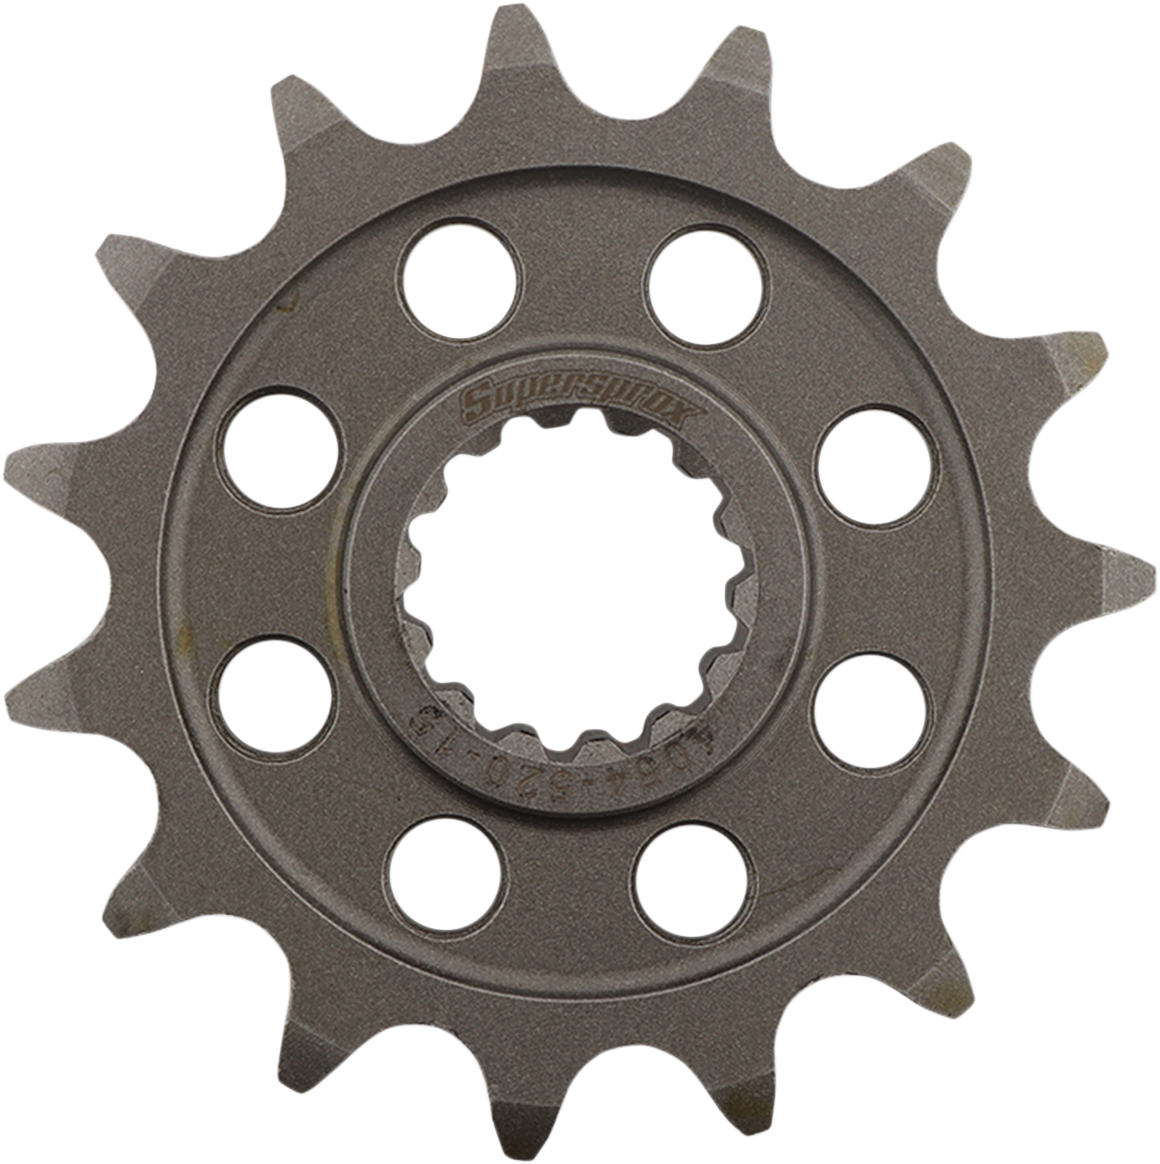 SUPERSPROX Countershaft Sprocket - 15 Tooth CST4054520-15-2